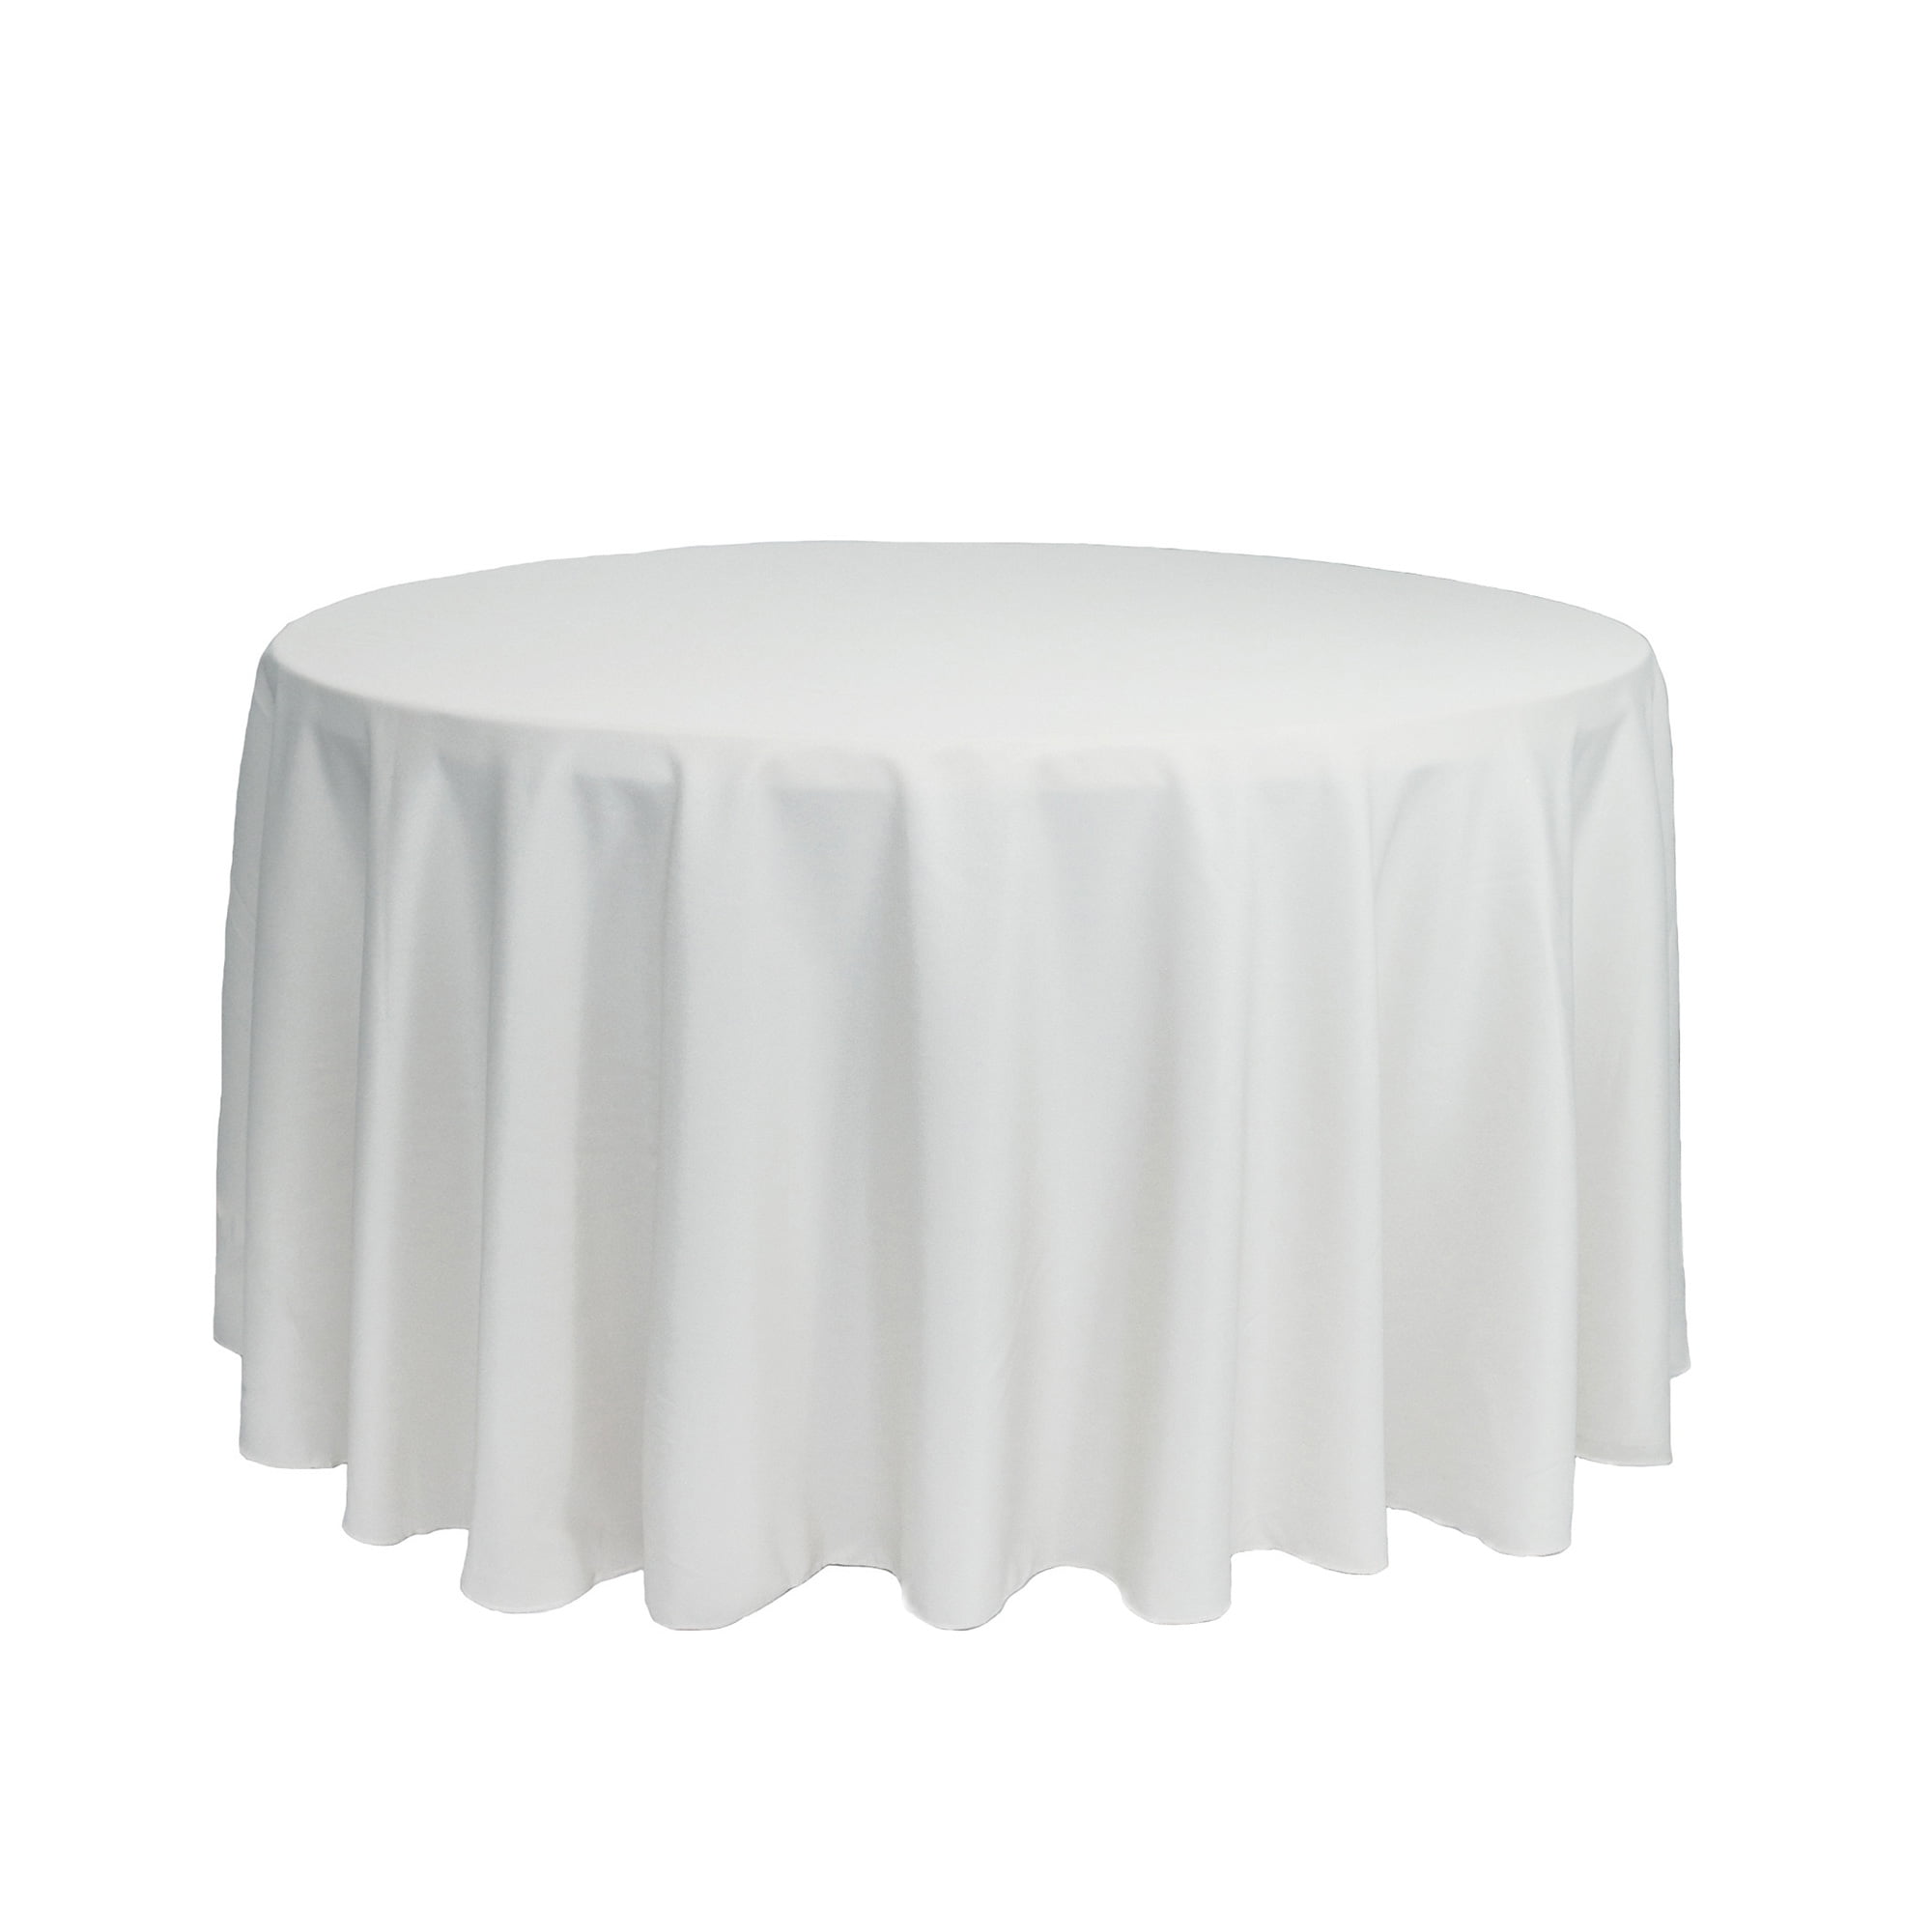 6 PACK 108" inch ROUND Tablecloth LOT 100% Polyester Overlay 23 Colors *SALE* 